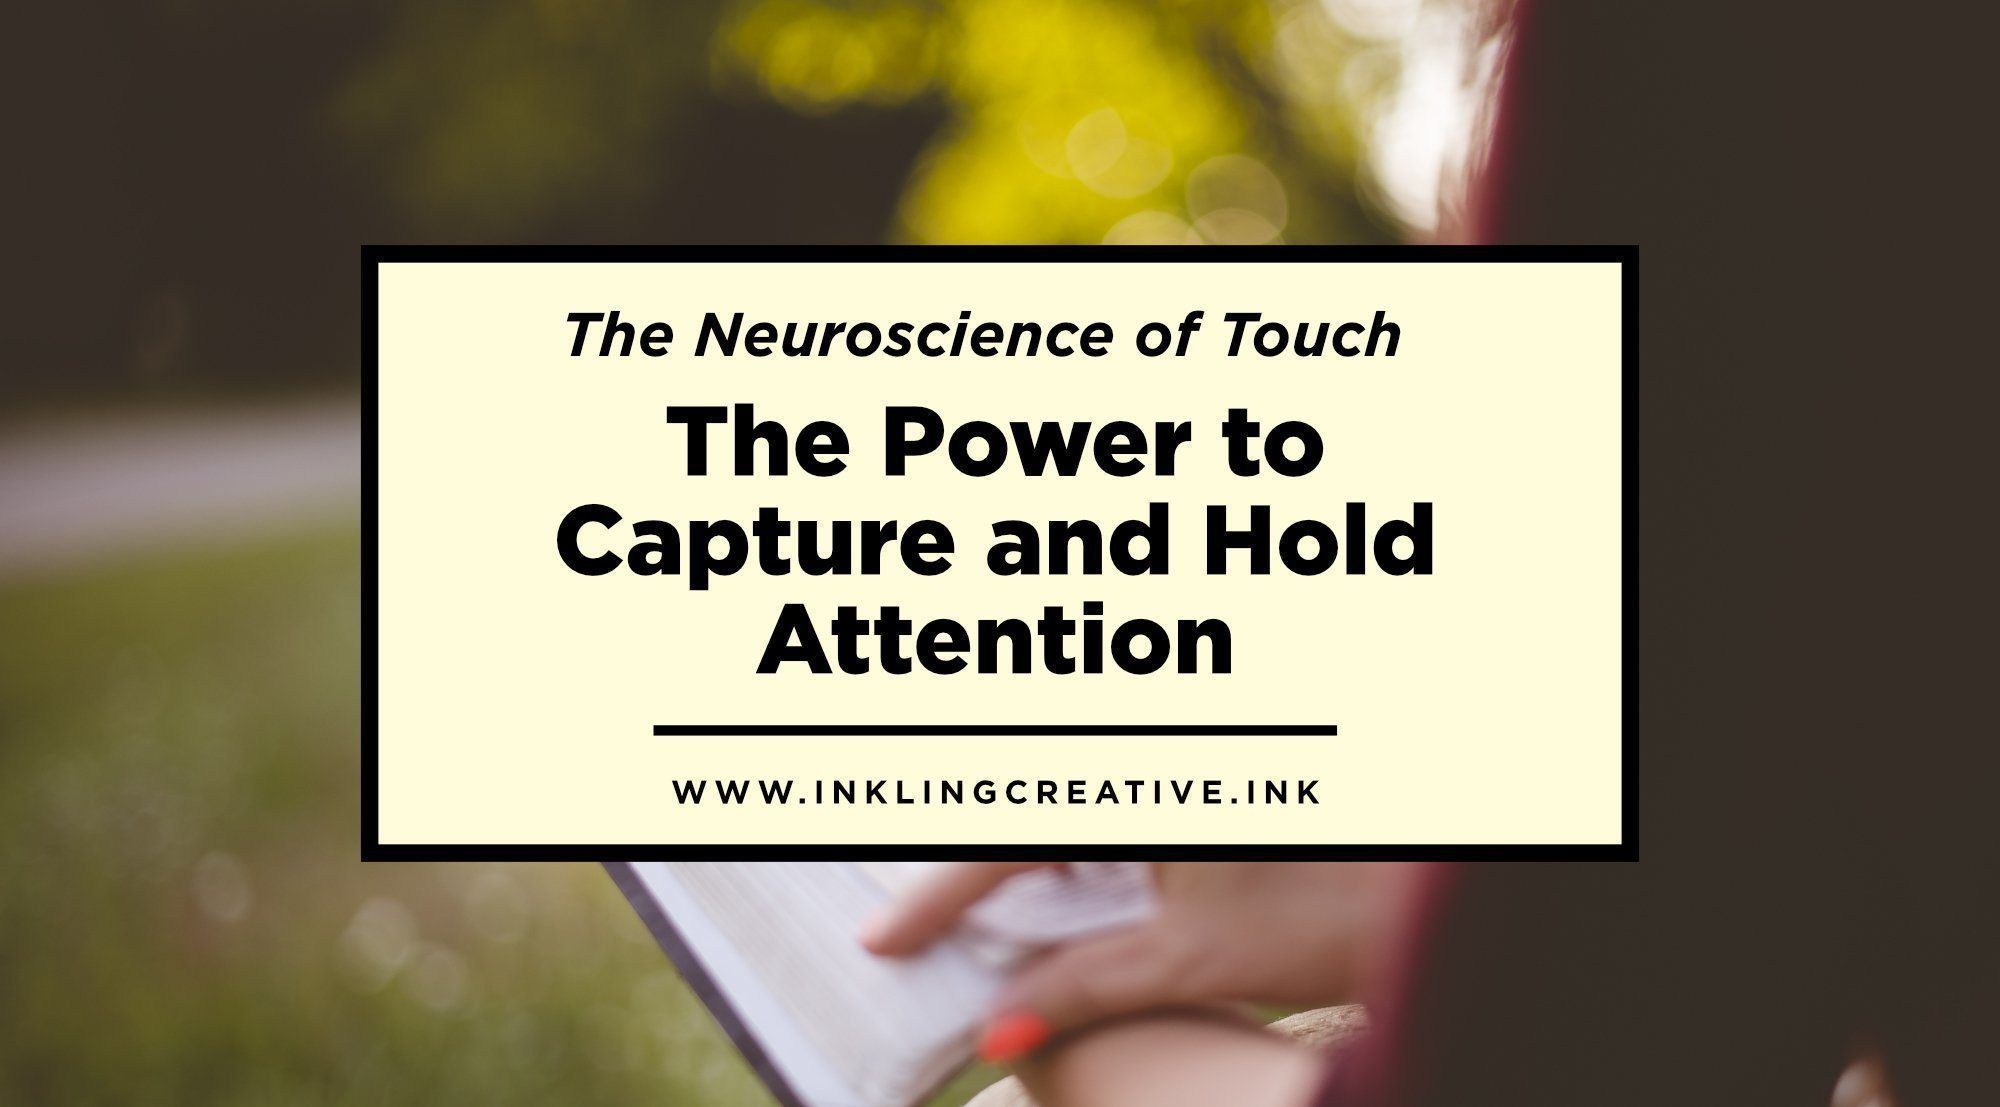 Print: The Power to Capture and Hold Attention